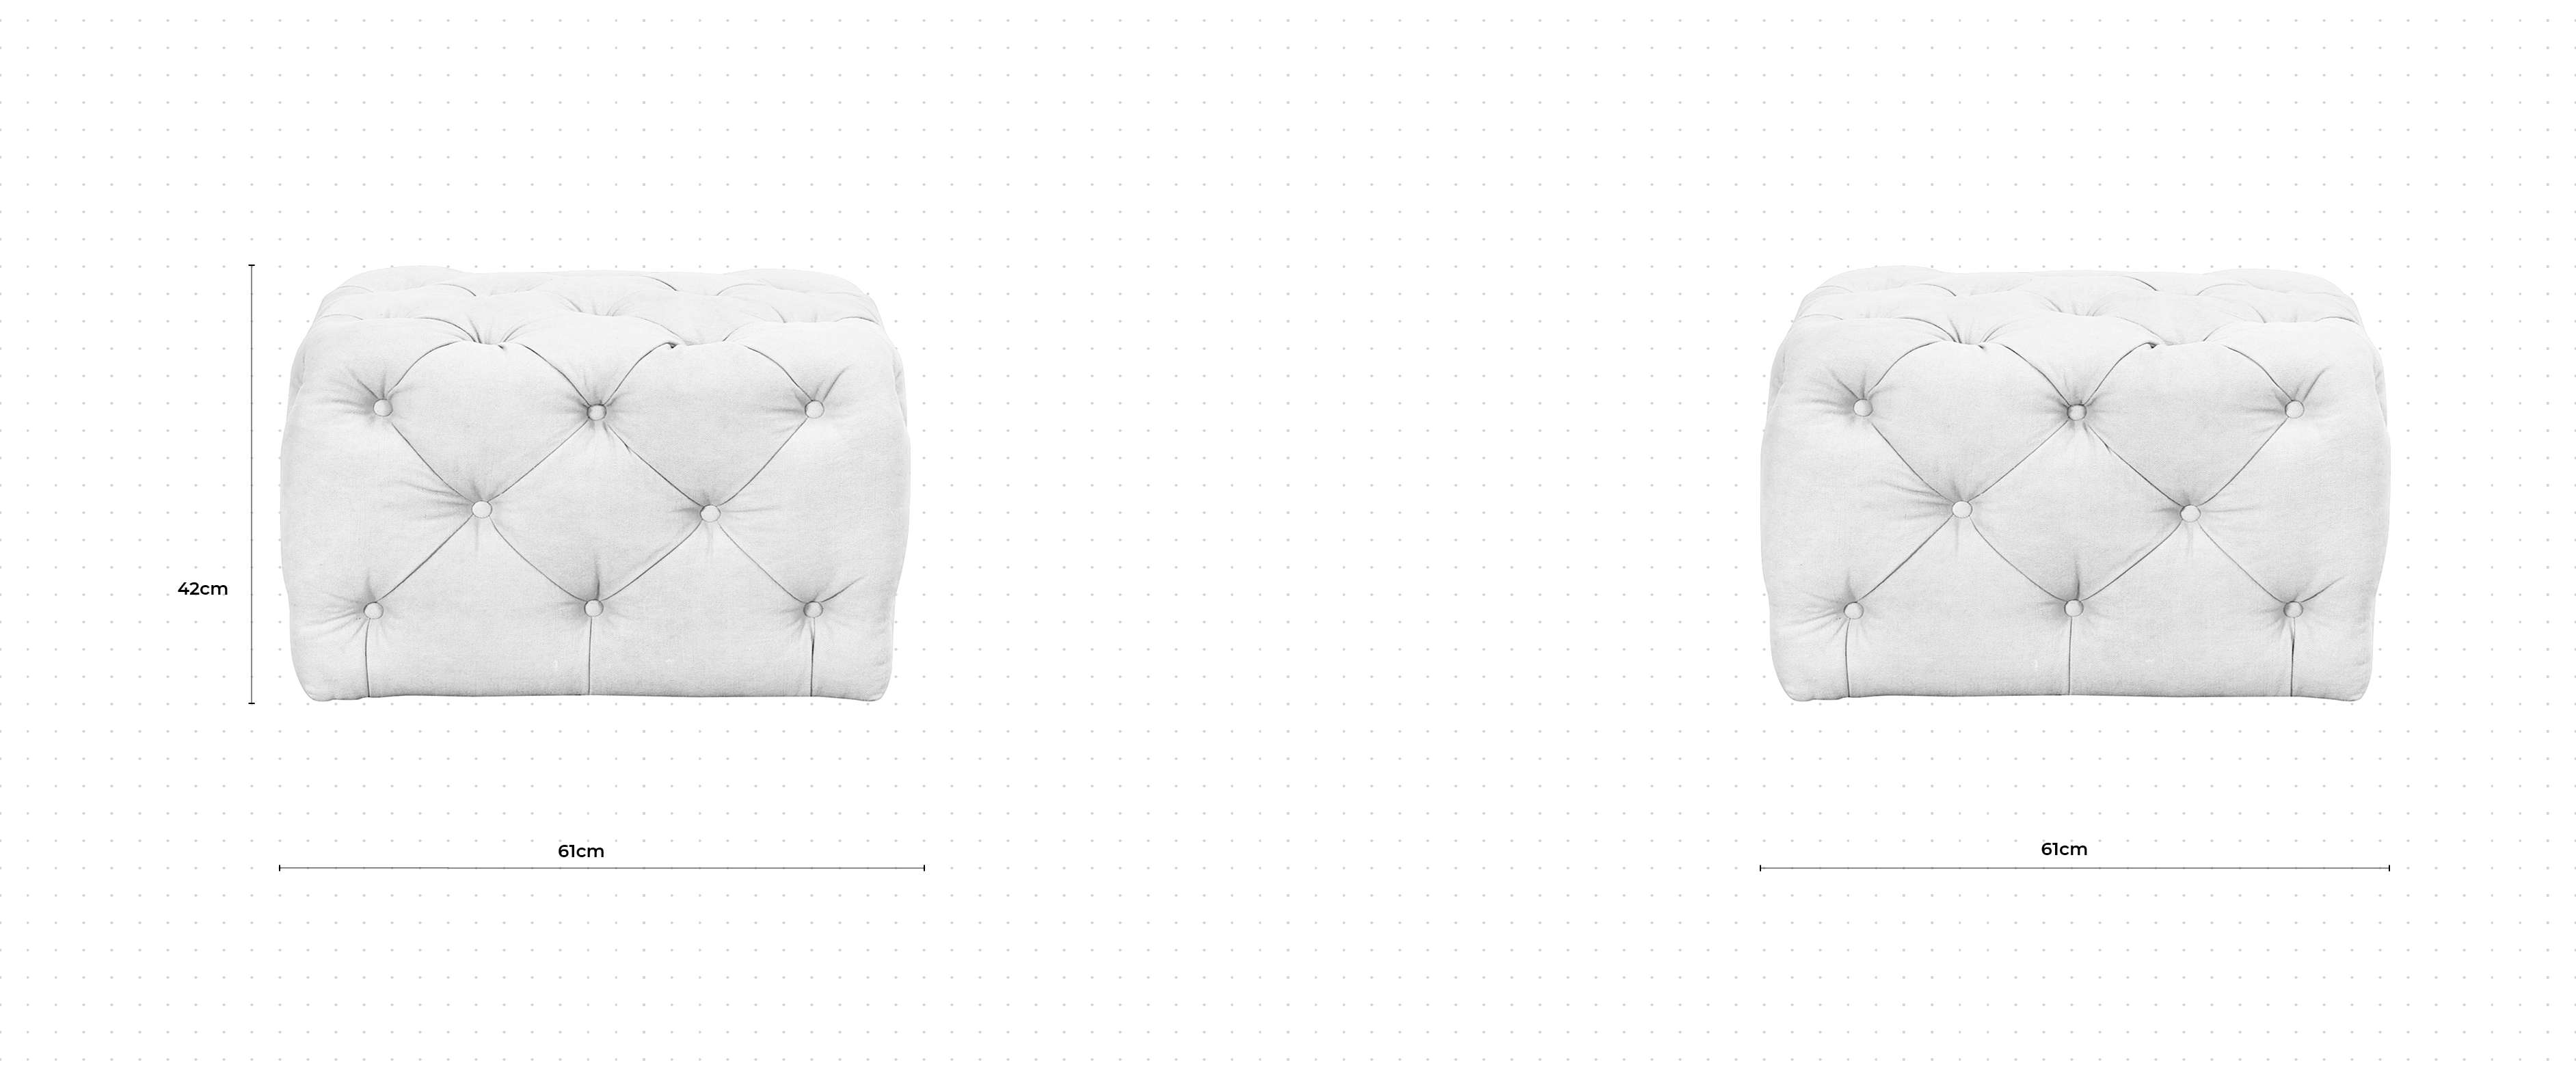 Tuft Small Footstool dimensions